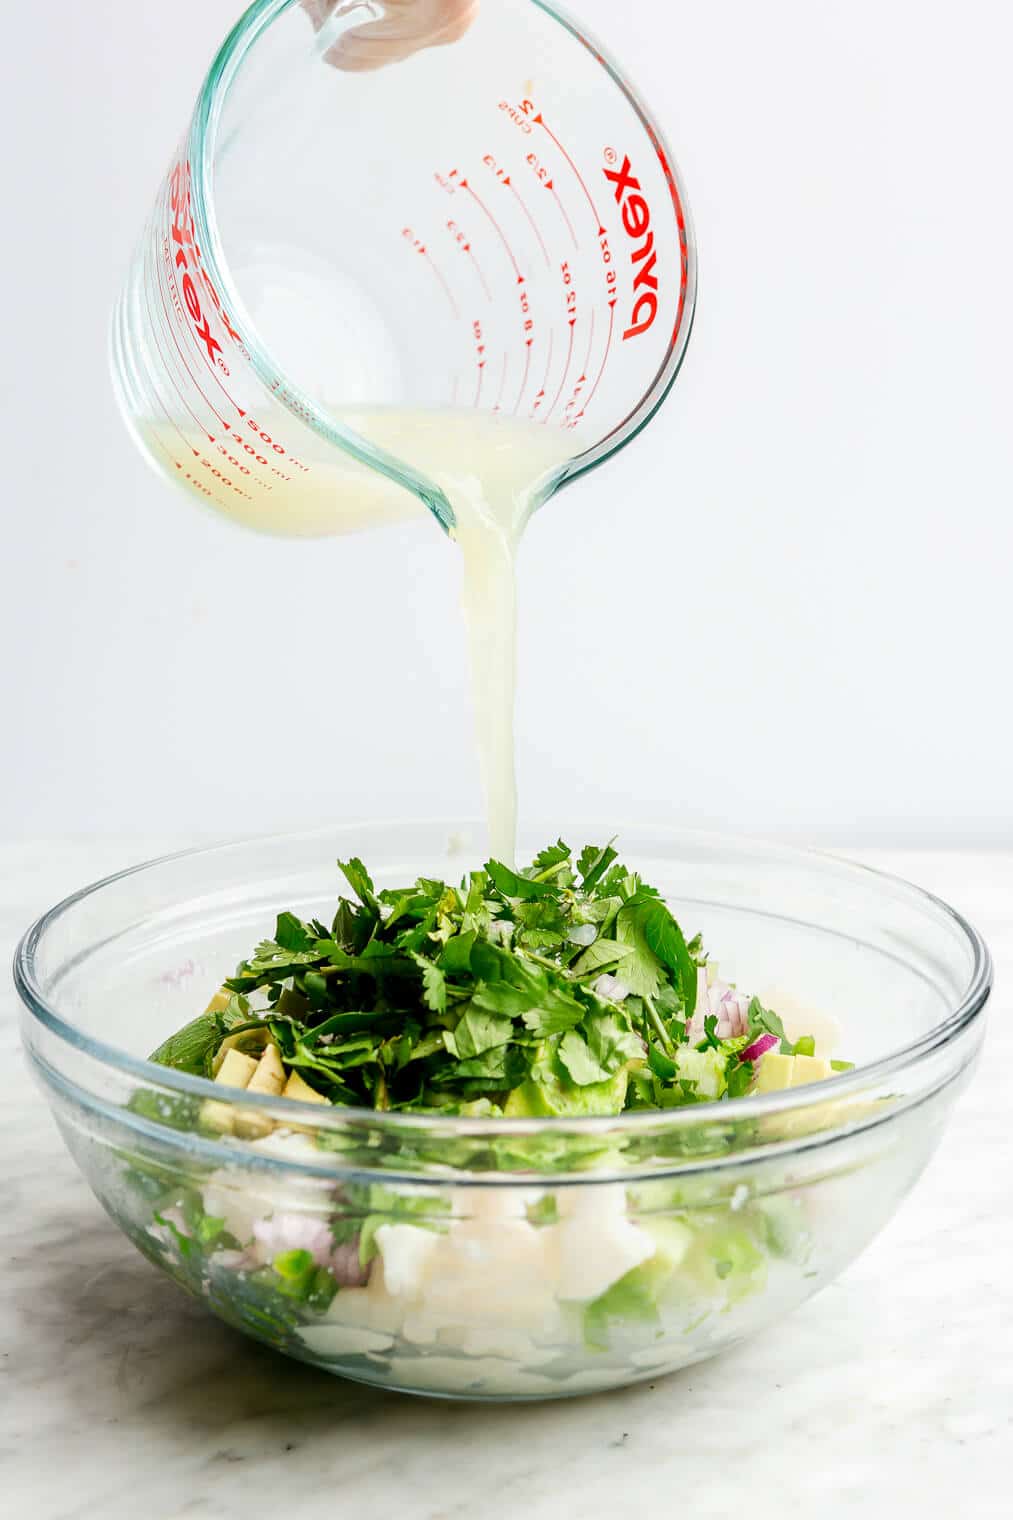 Hand pouring lime juice over a bowl of fresh cilantro, diced veggies, and cubed white fish.